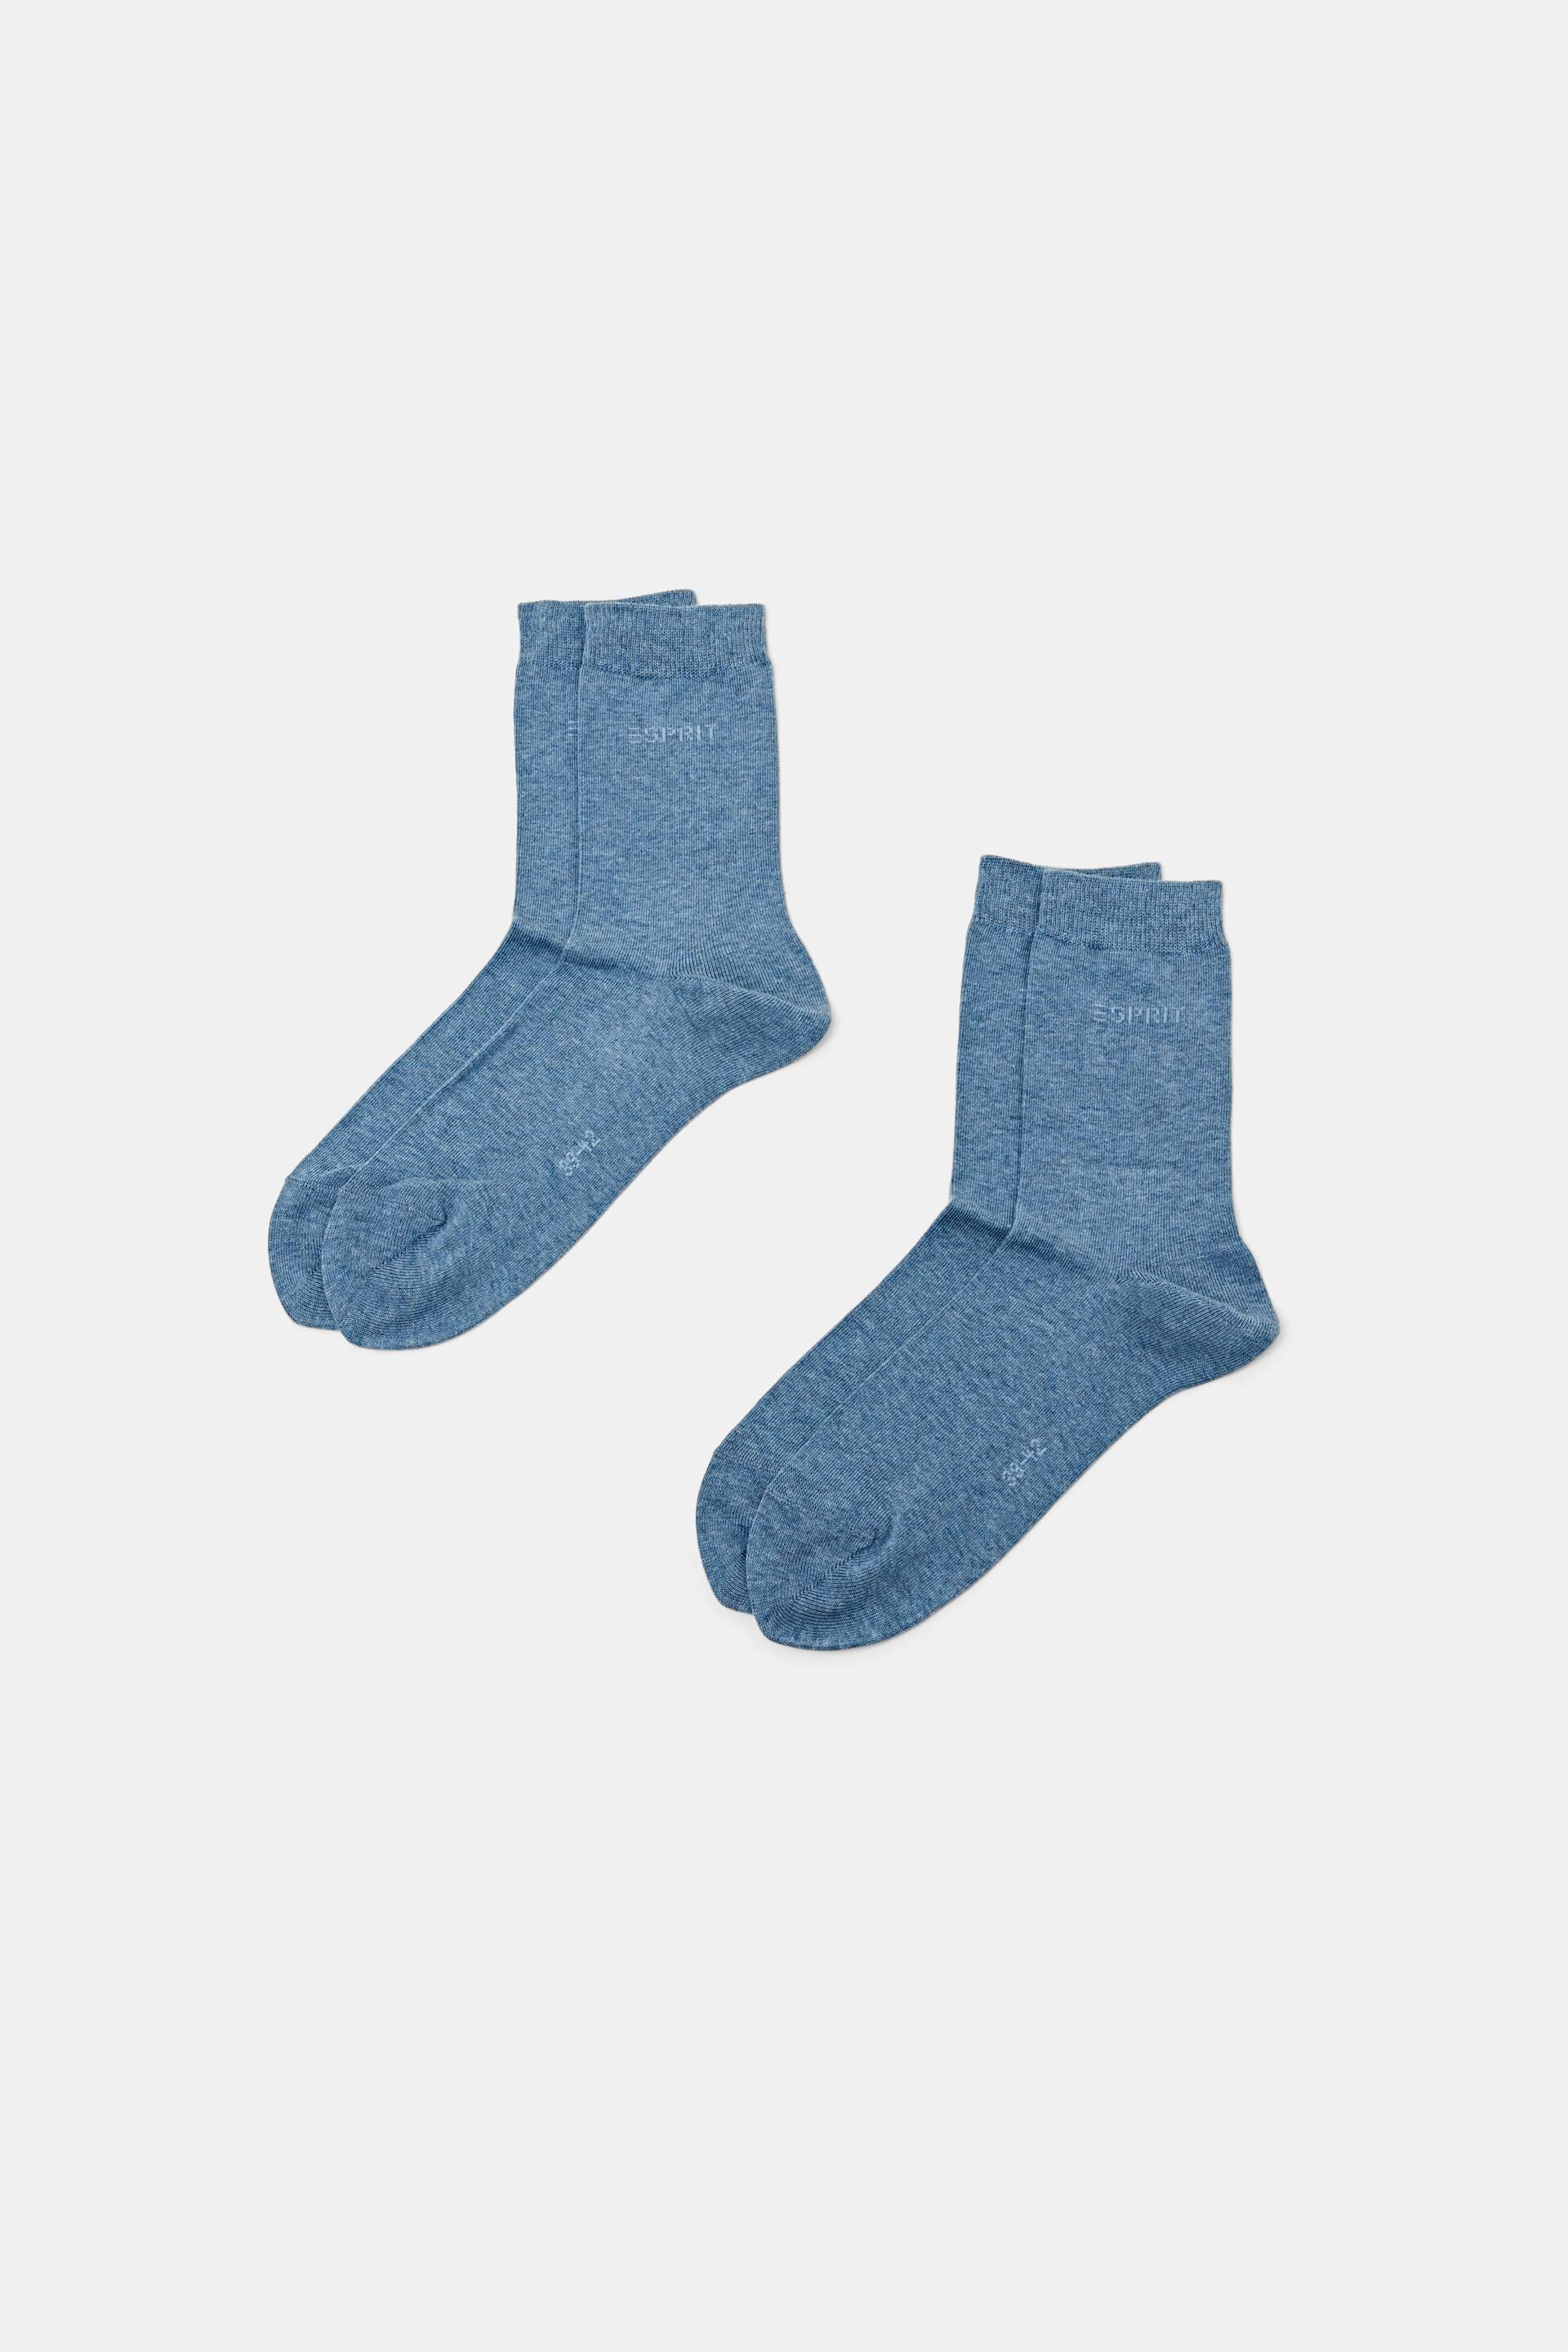 Esprit Online Store 2-pack of socks with knitted logo, organic cotton